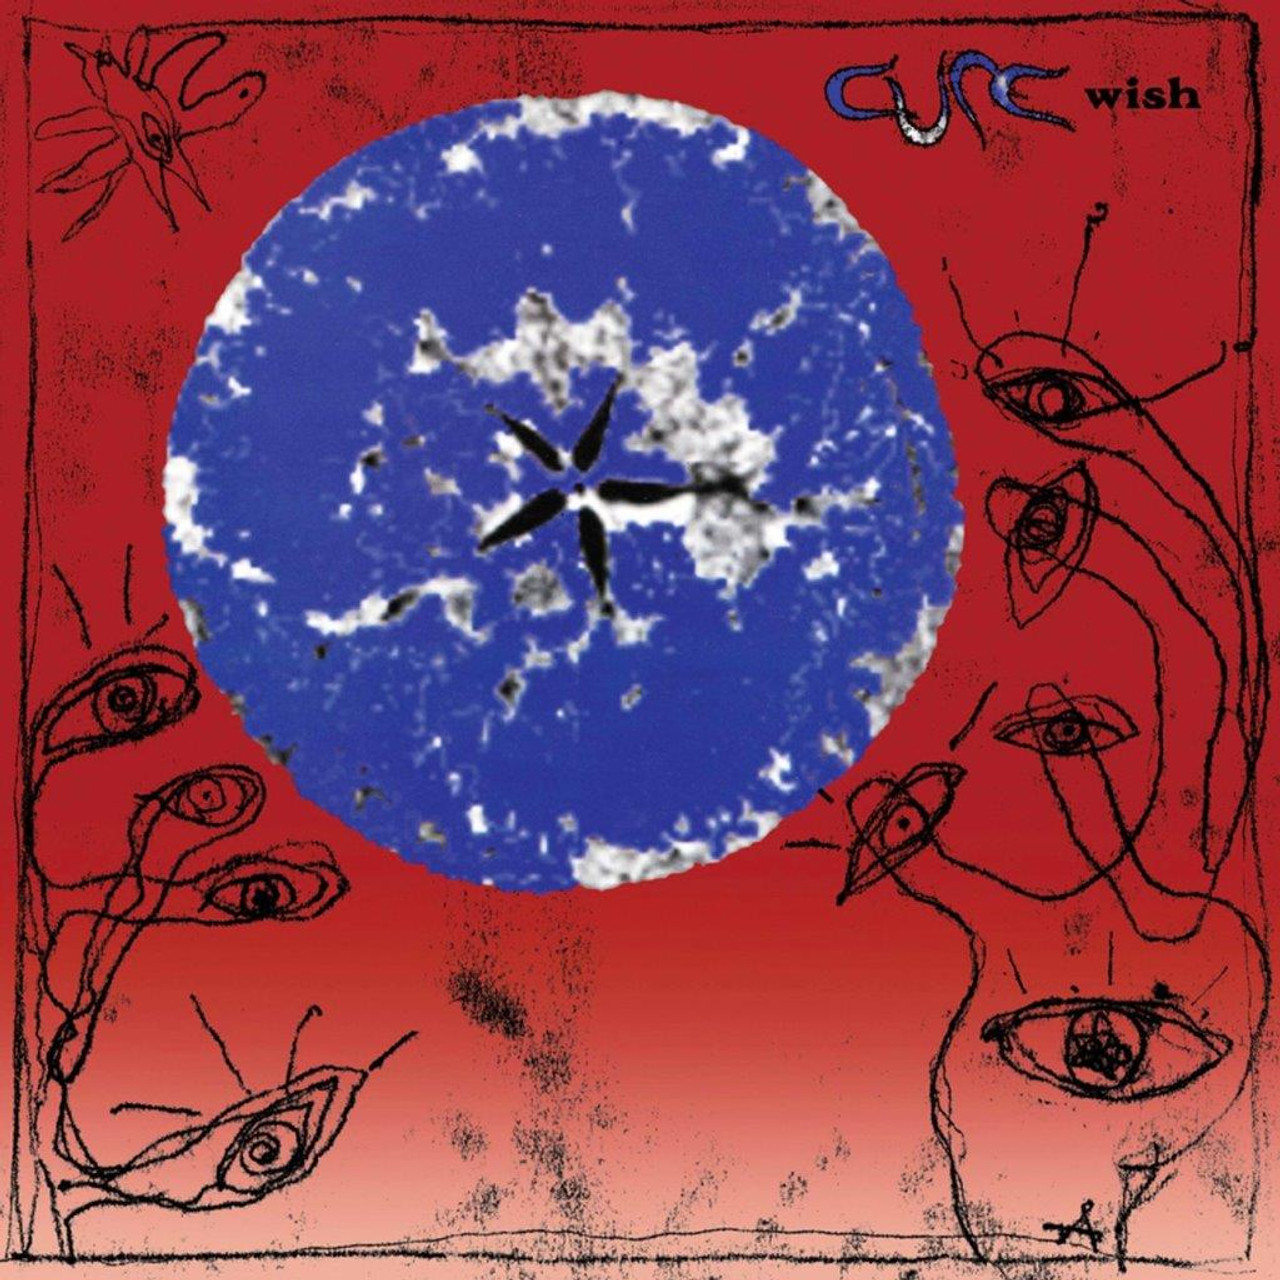 The Cure 'Wish' 30th Anniversary Edition (Remastered) CD